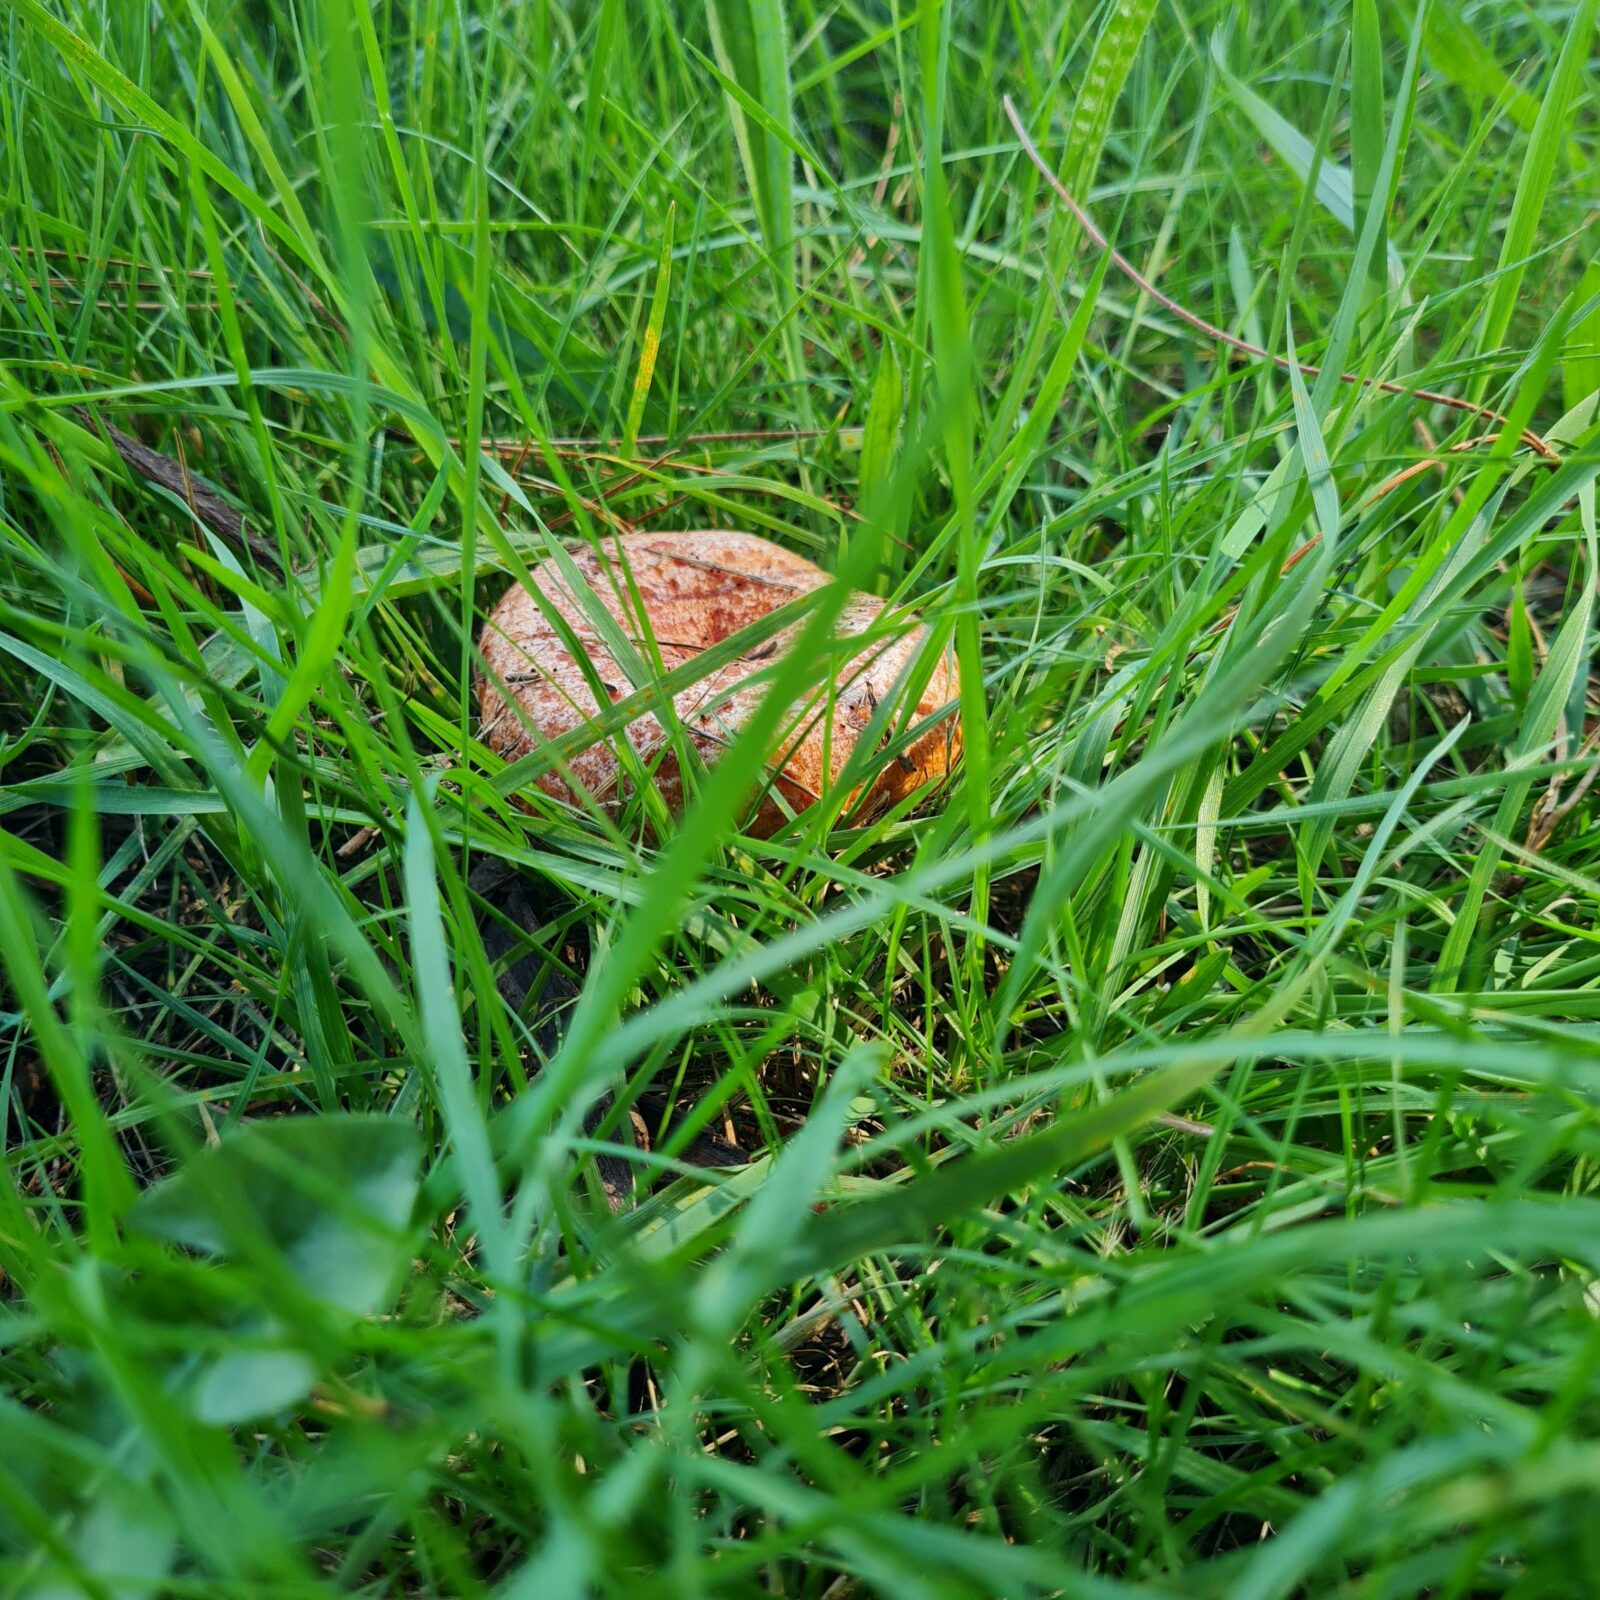 A red pine mushroom growing in grass